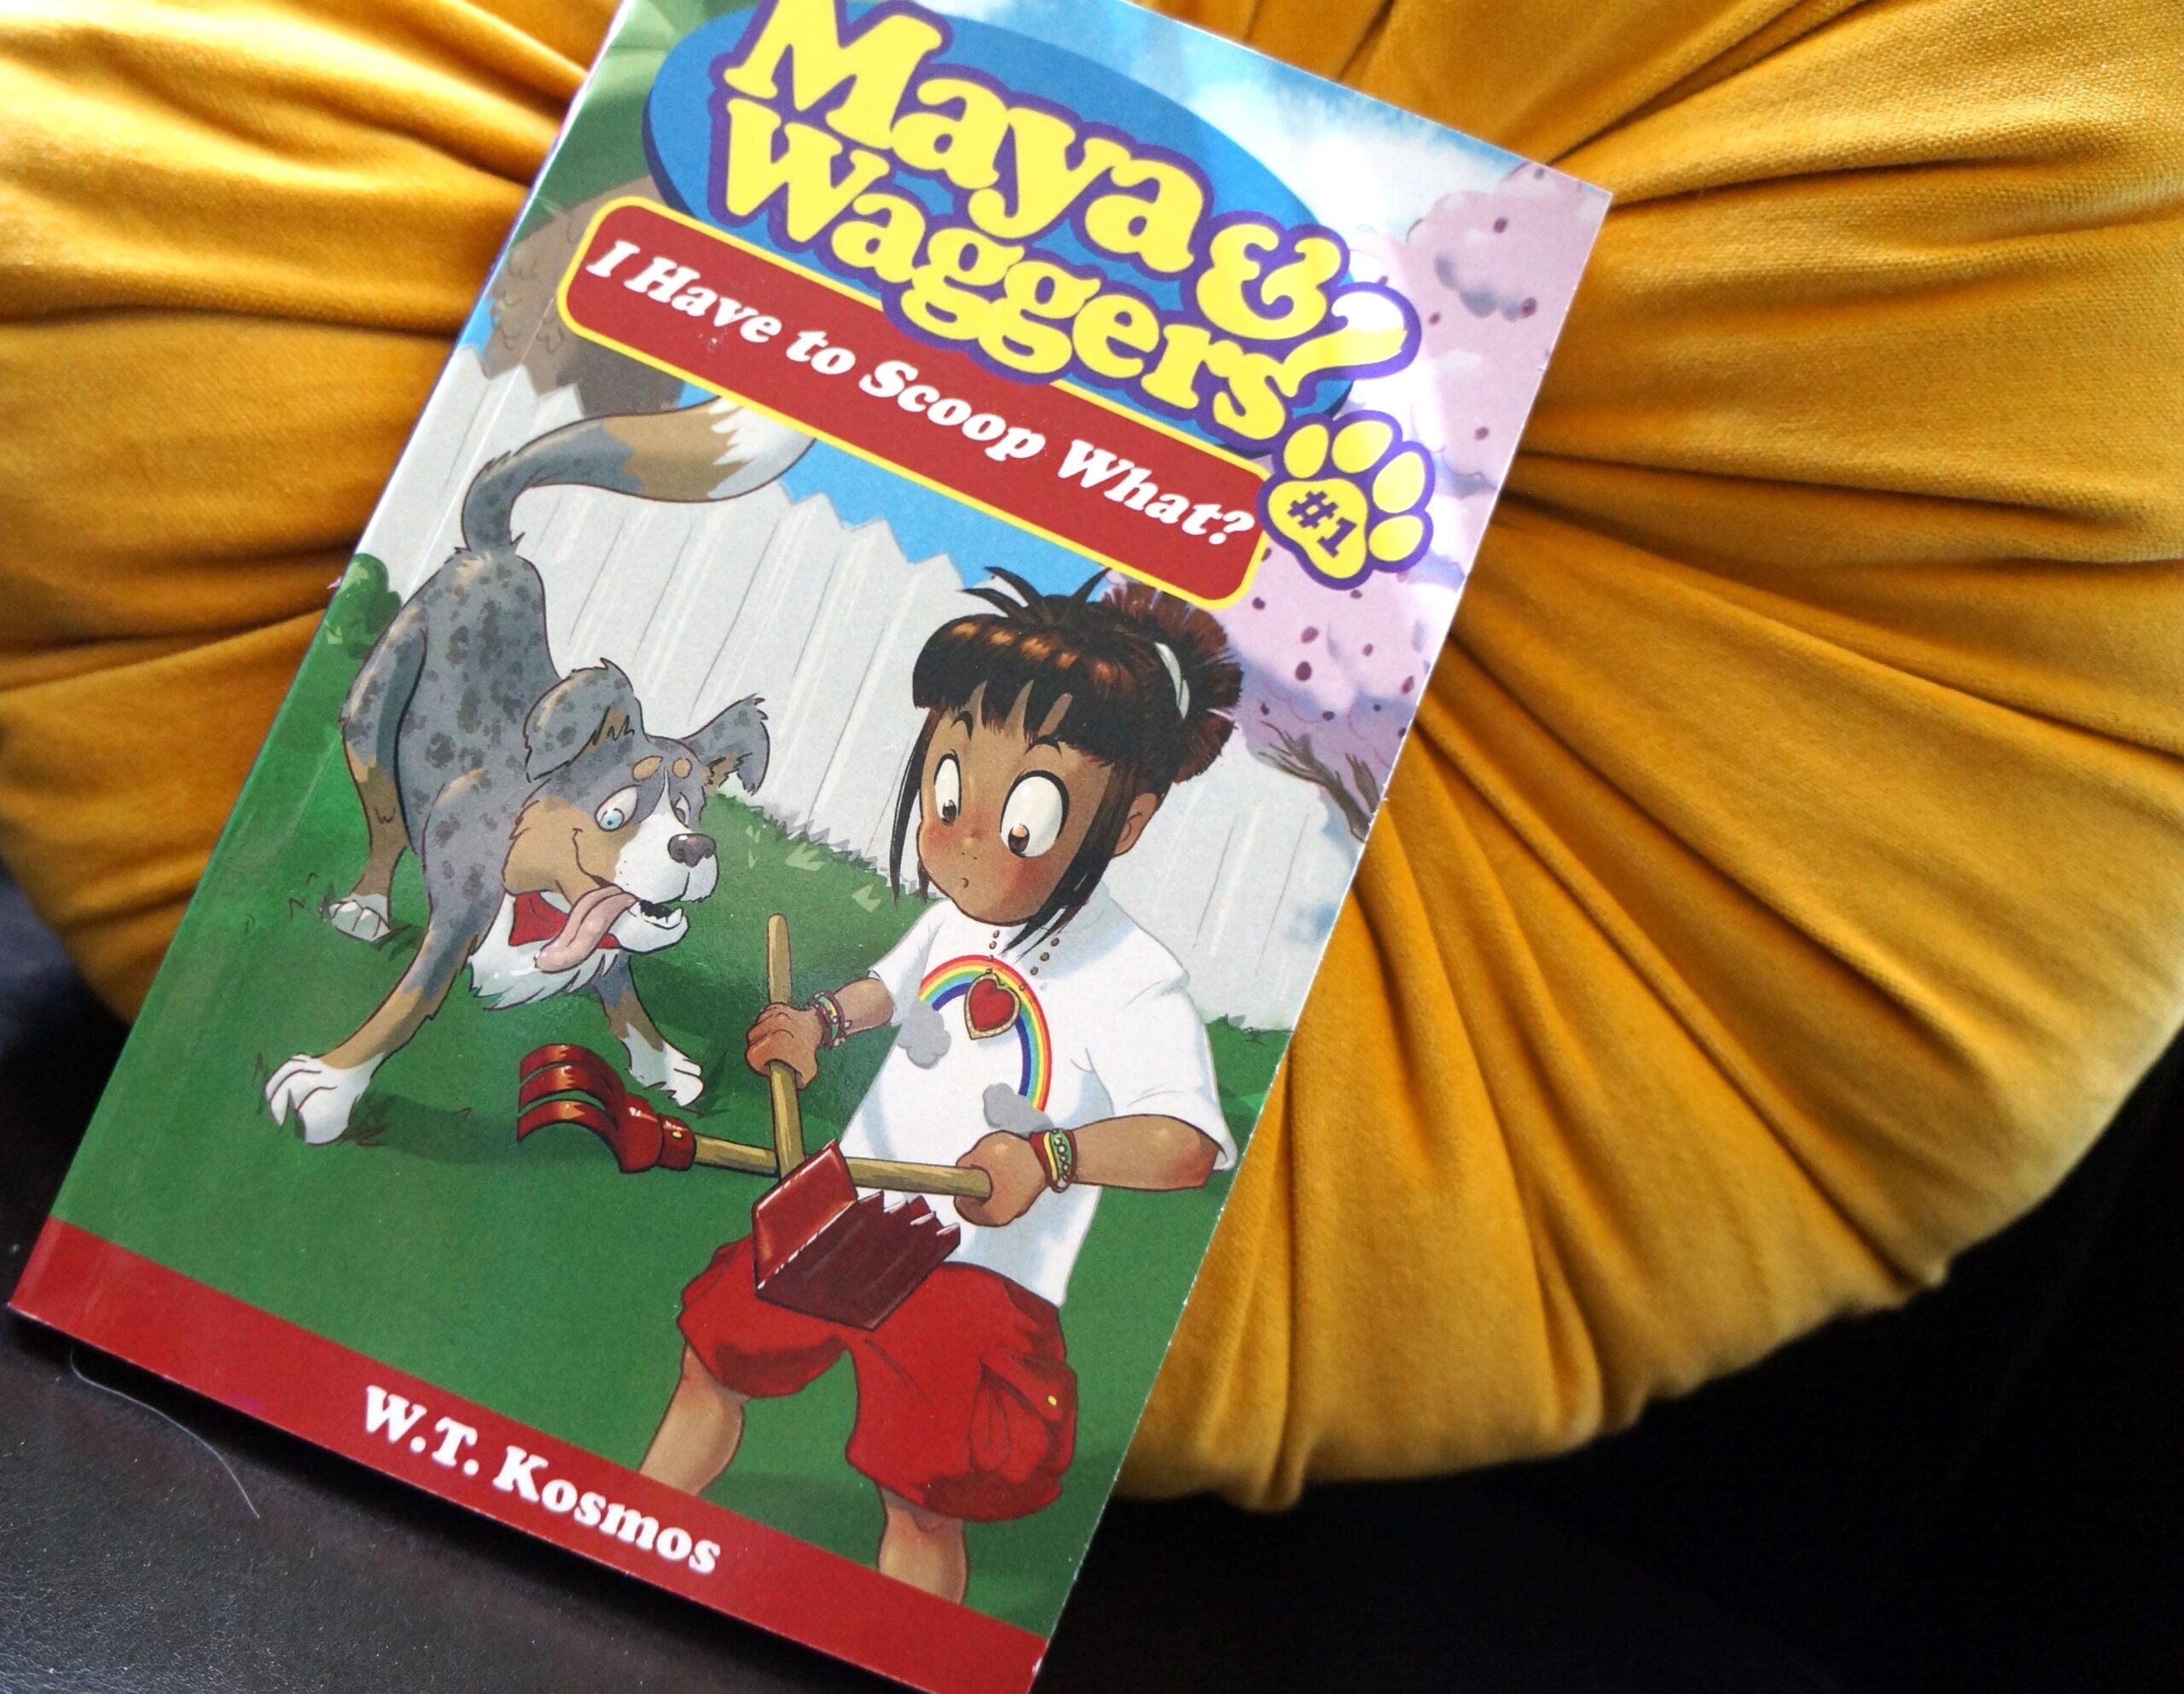 dog book for kids review - Maya & Watters #1 - I have to scoop what by WT Kosmos